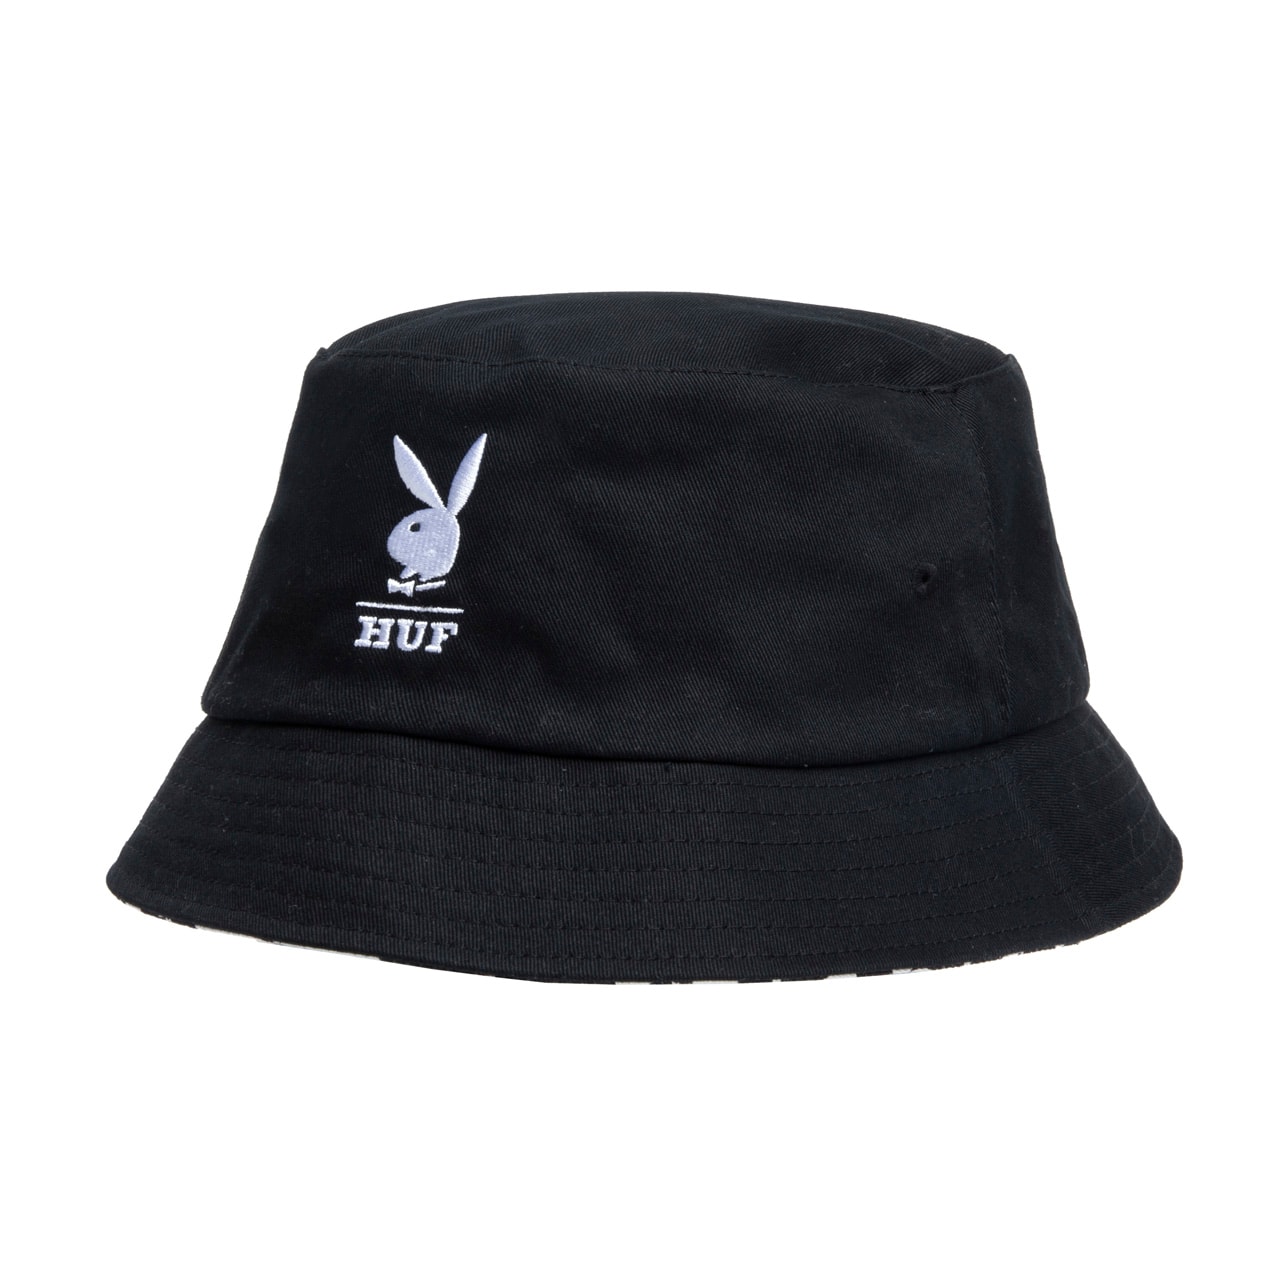 playboy huf collaboration collection apparel accessories release